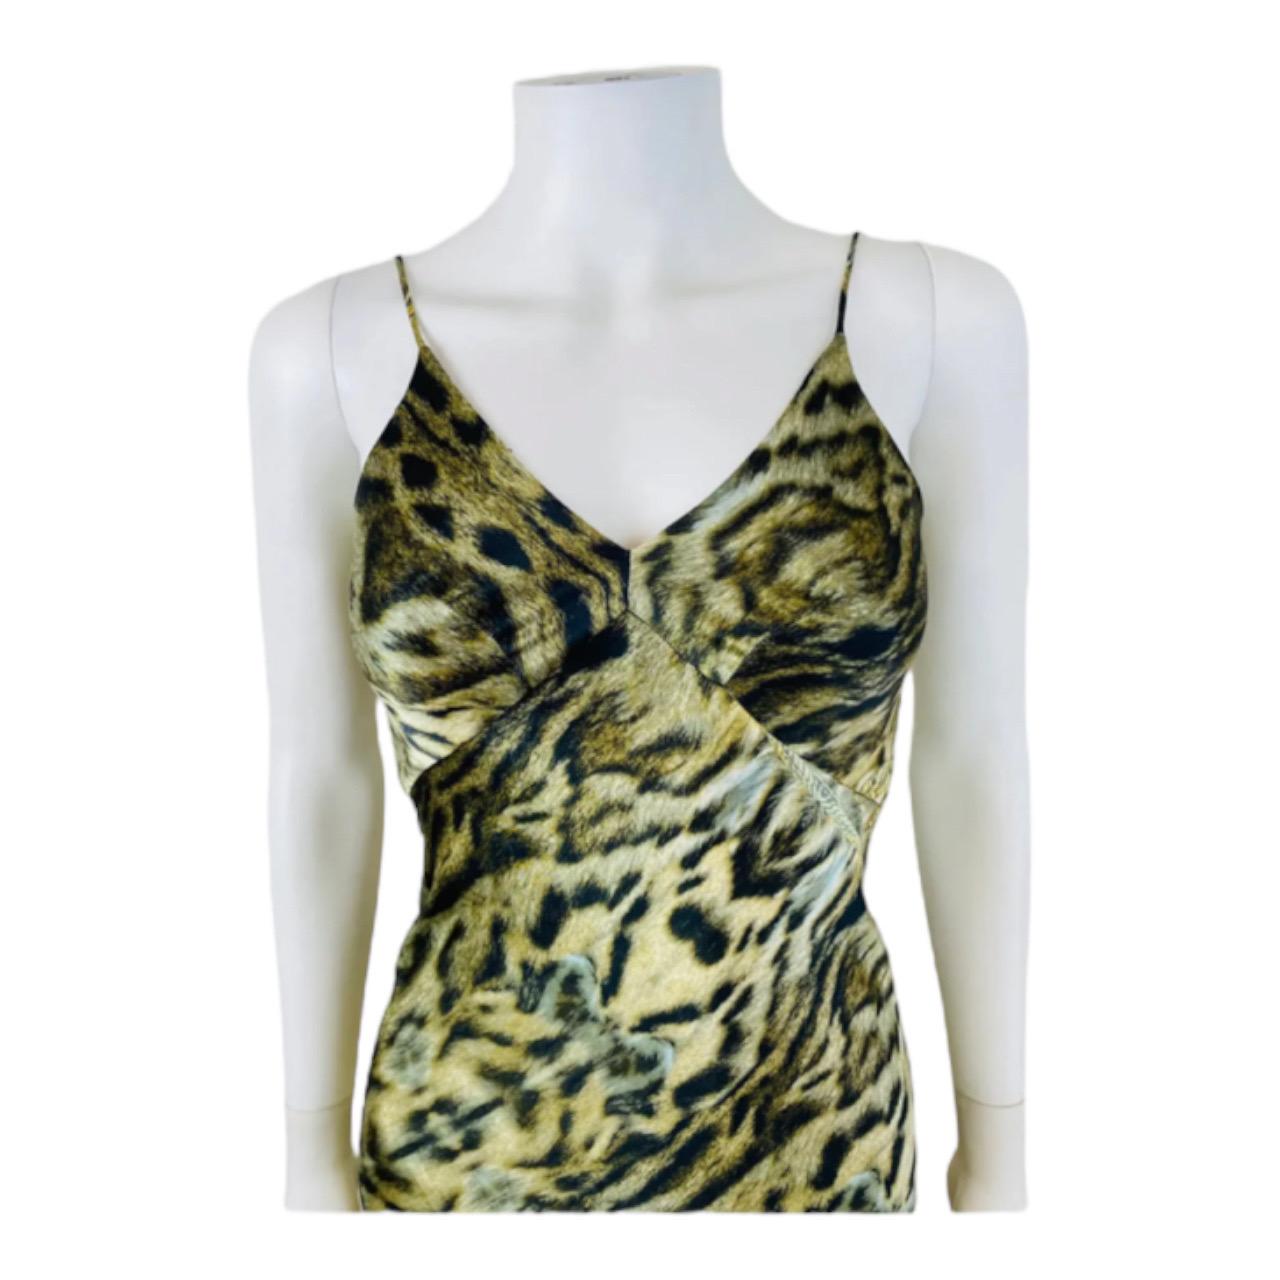 Stunning 2003 Roberto Cavalli Dress
Leopard silk fabric with oversized gold chains print
Fitted bust with V neckline
Thin shoulder straps
Fitted dress throughout with mermaid flared hem
Train in the back
Maxi length
Unlined
Slips on overhead

Marked